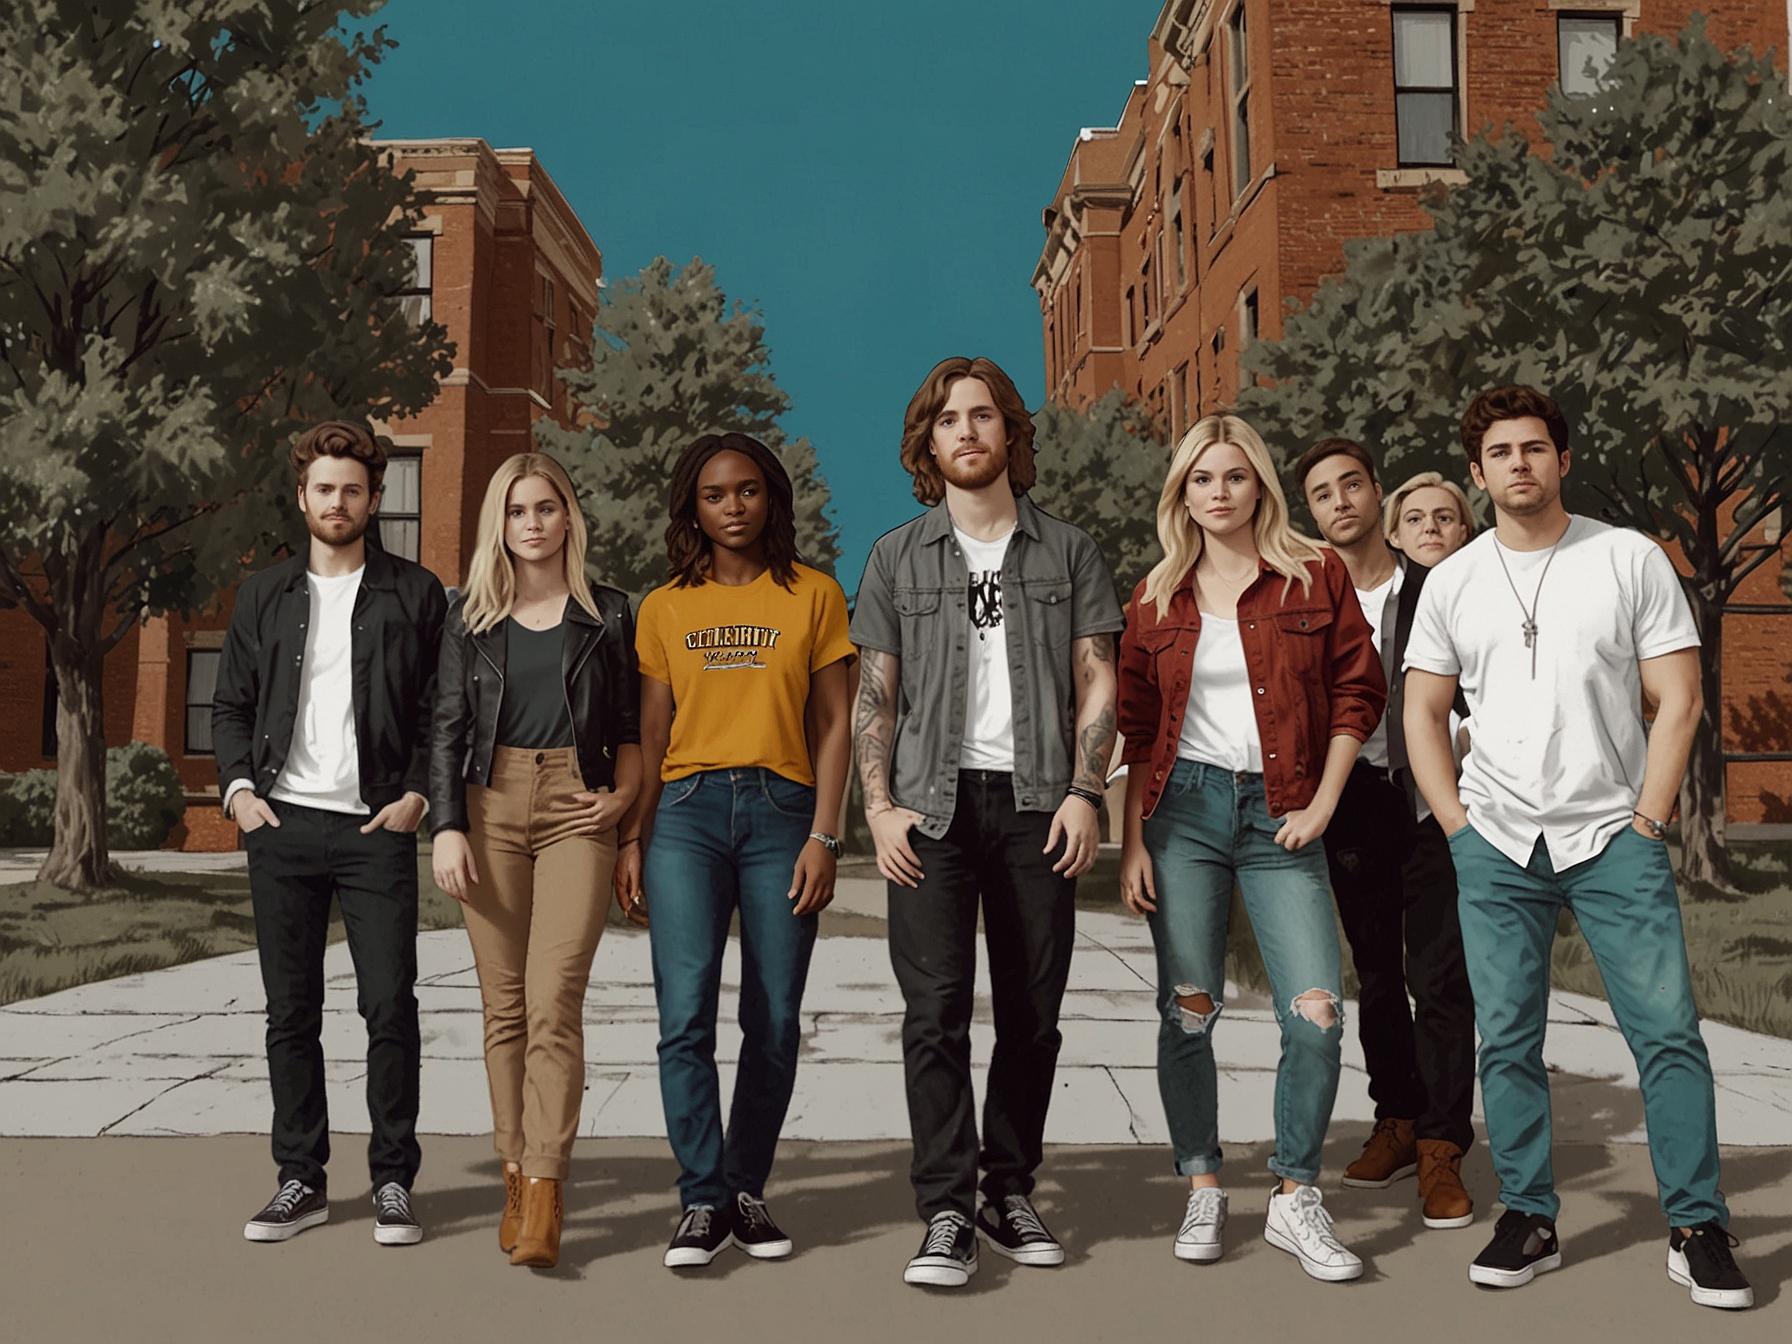 Eight celebrities experiencing campus life in College Hill: Celebrity Edition, a reality TV show blending luxury with the everyday challenges of college, filled with drama and entertainment.